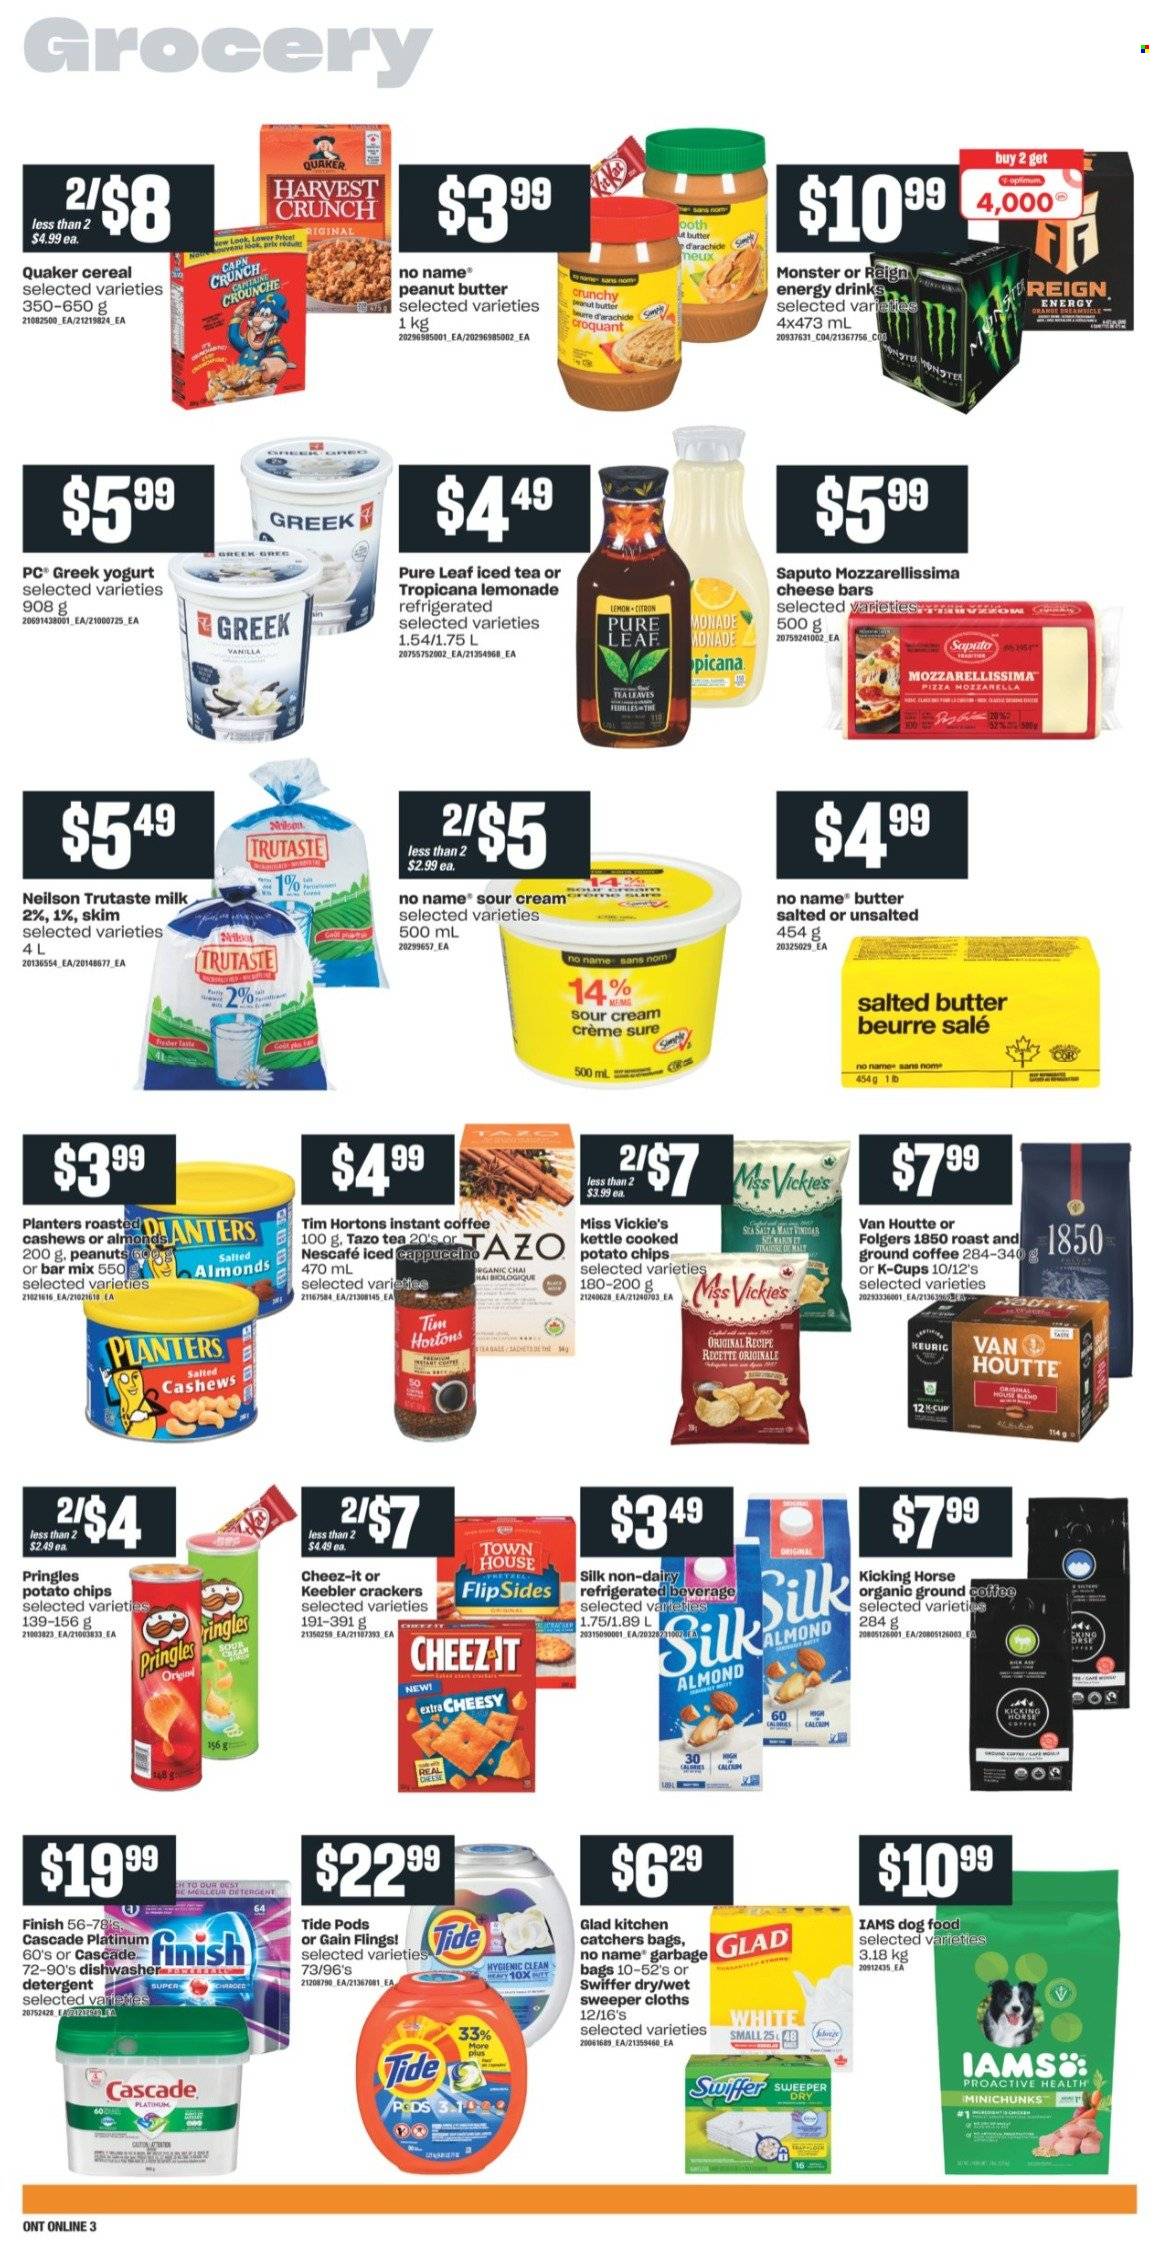 thumbnail - Independent Flyer - October 28, 2021 - November 03, 2021 - Sales products - No Name, pizza, Quaker, greek yoghurt, yoghurt, milk, Silk, salted butter, sour cream, crackers, Keebler, potato chips, Pringles, Cheez-It, malt, cereals, peanut butter, almonds, cashews, Planters, lemonade, energy drink, Monster, ice tea, Pure Leaf, cappuccino, instant coffee, Folgers, ground coffee, coffee capsules, K-Cups, Keurig, Gain, Swiffer, Tide, Cascade, Sure, bag, animal food, dog food, Iams, detergent, chips, Nescafé, oranges. Page 7.